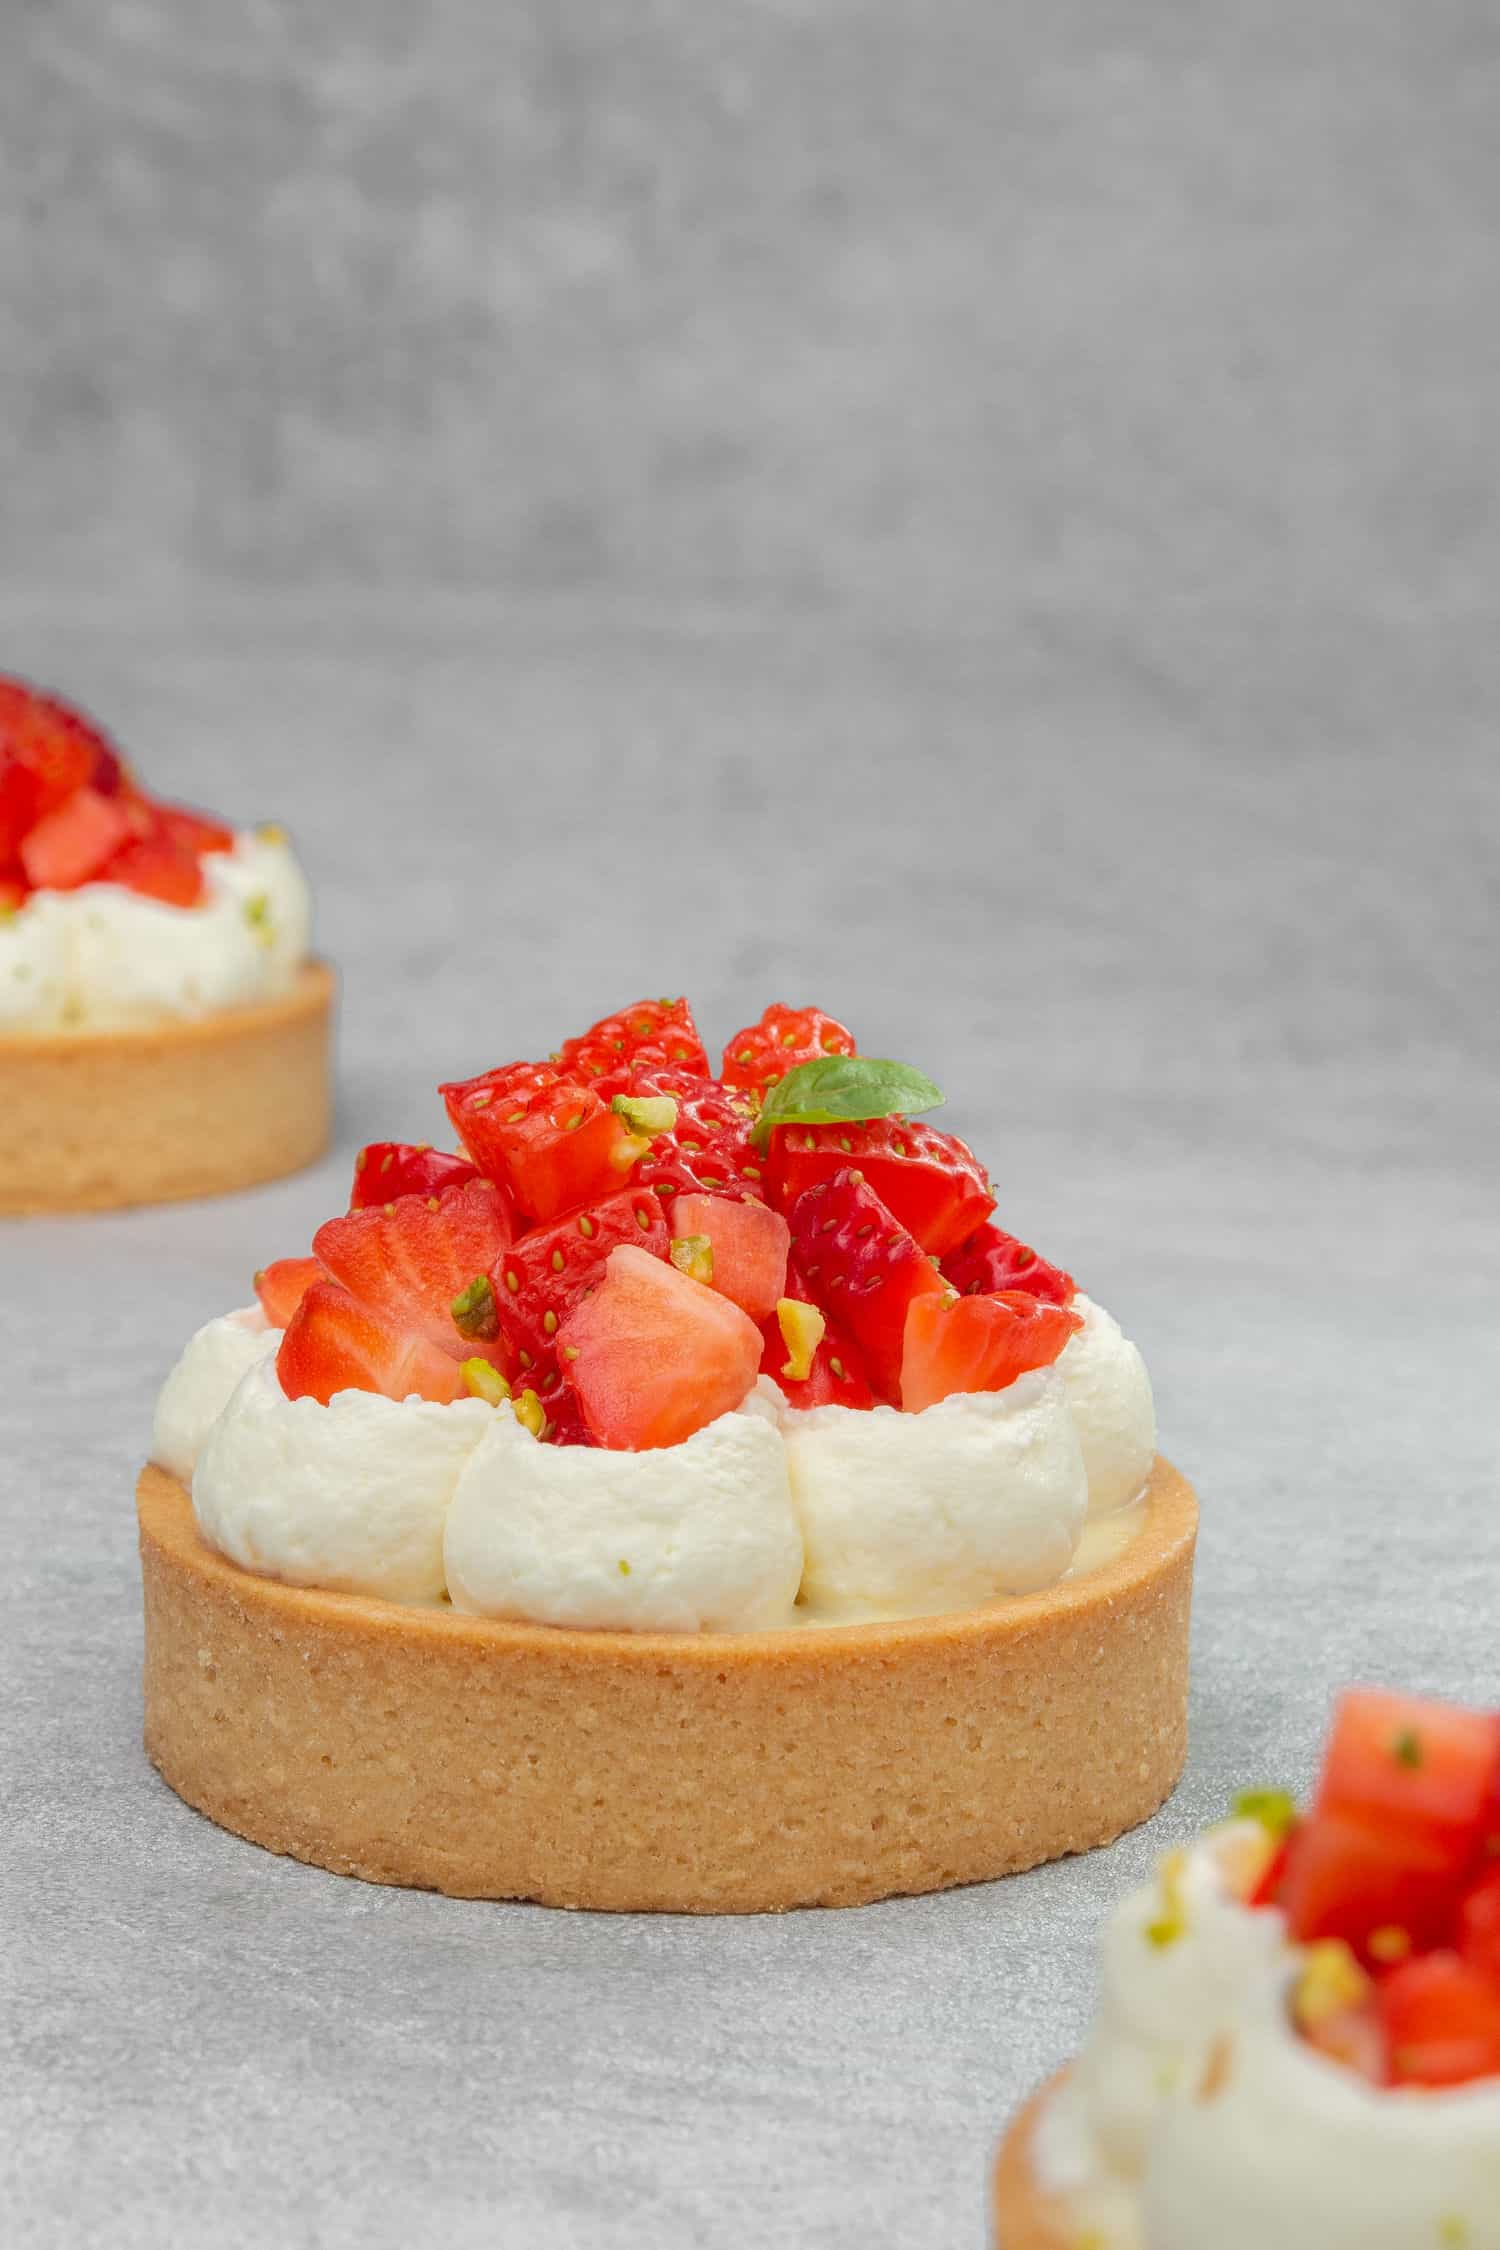 A Strawberry cream tart on a grey surface.